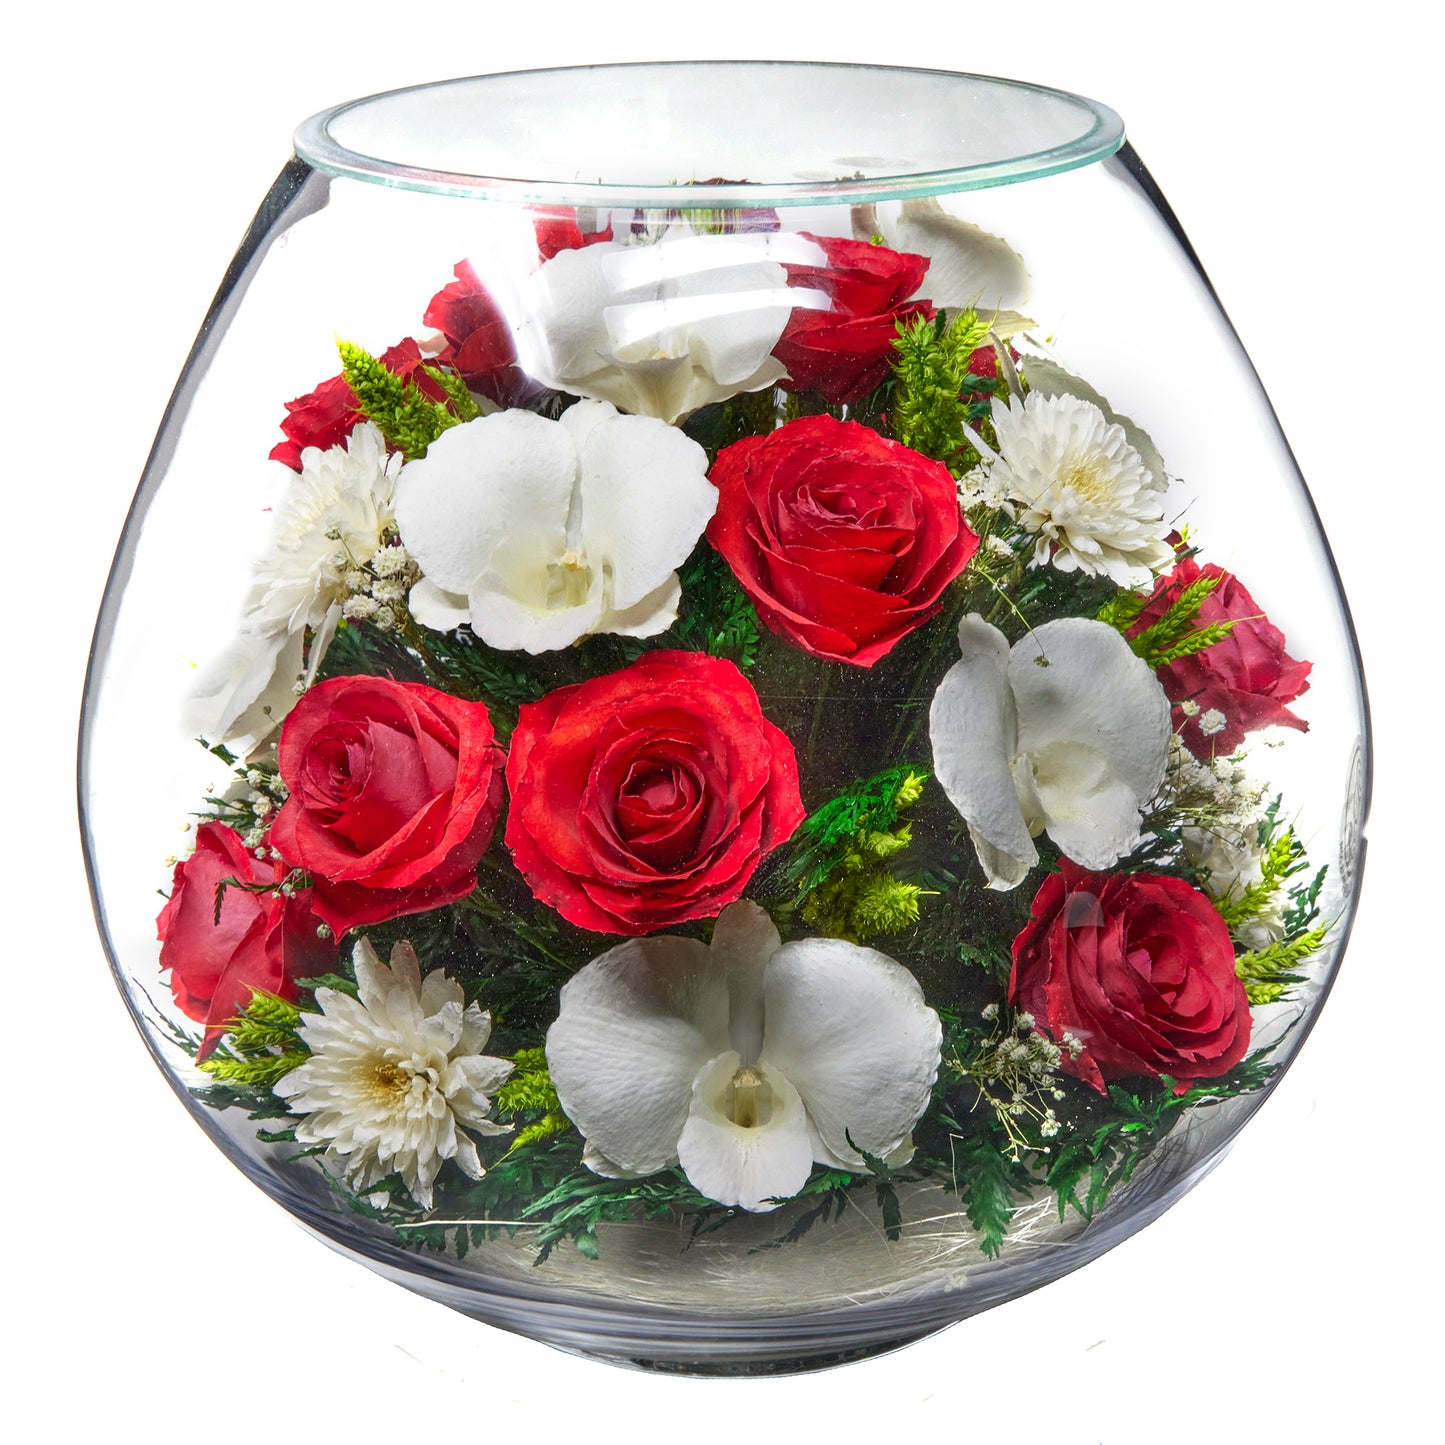 In Flores Veritas: Rose and Orchid Harmony Grand Bowl Vase - Lasts up to 5 Years - Luxurious Gift for Any Occasion